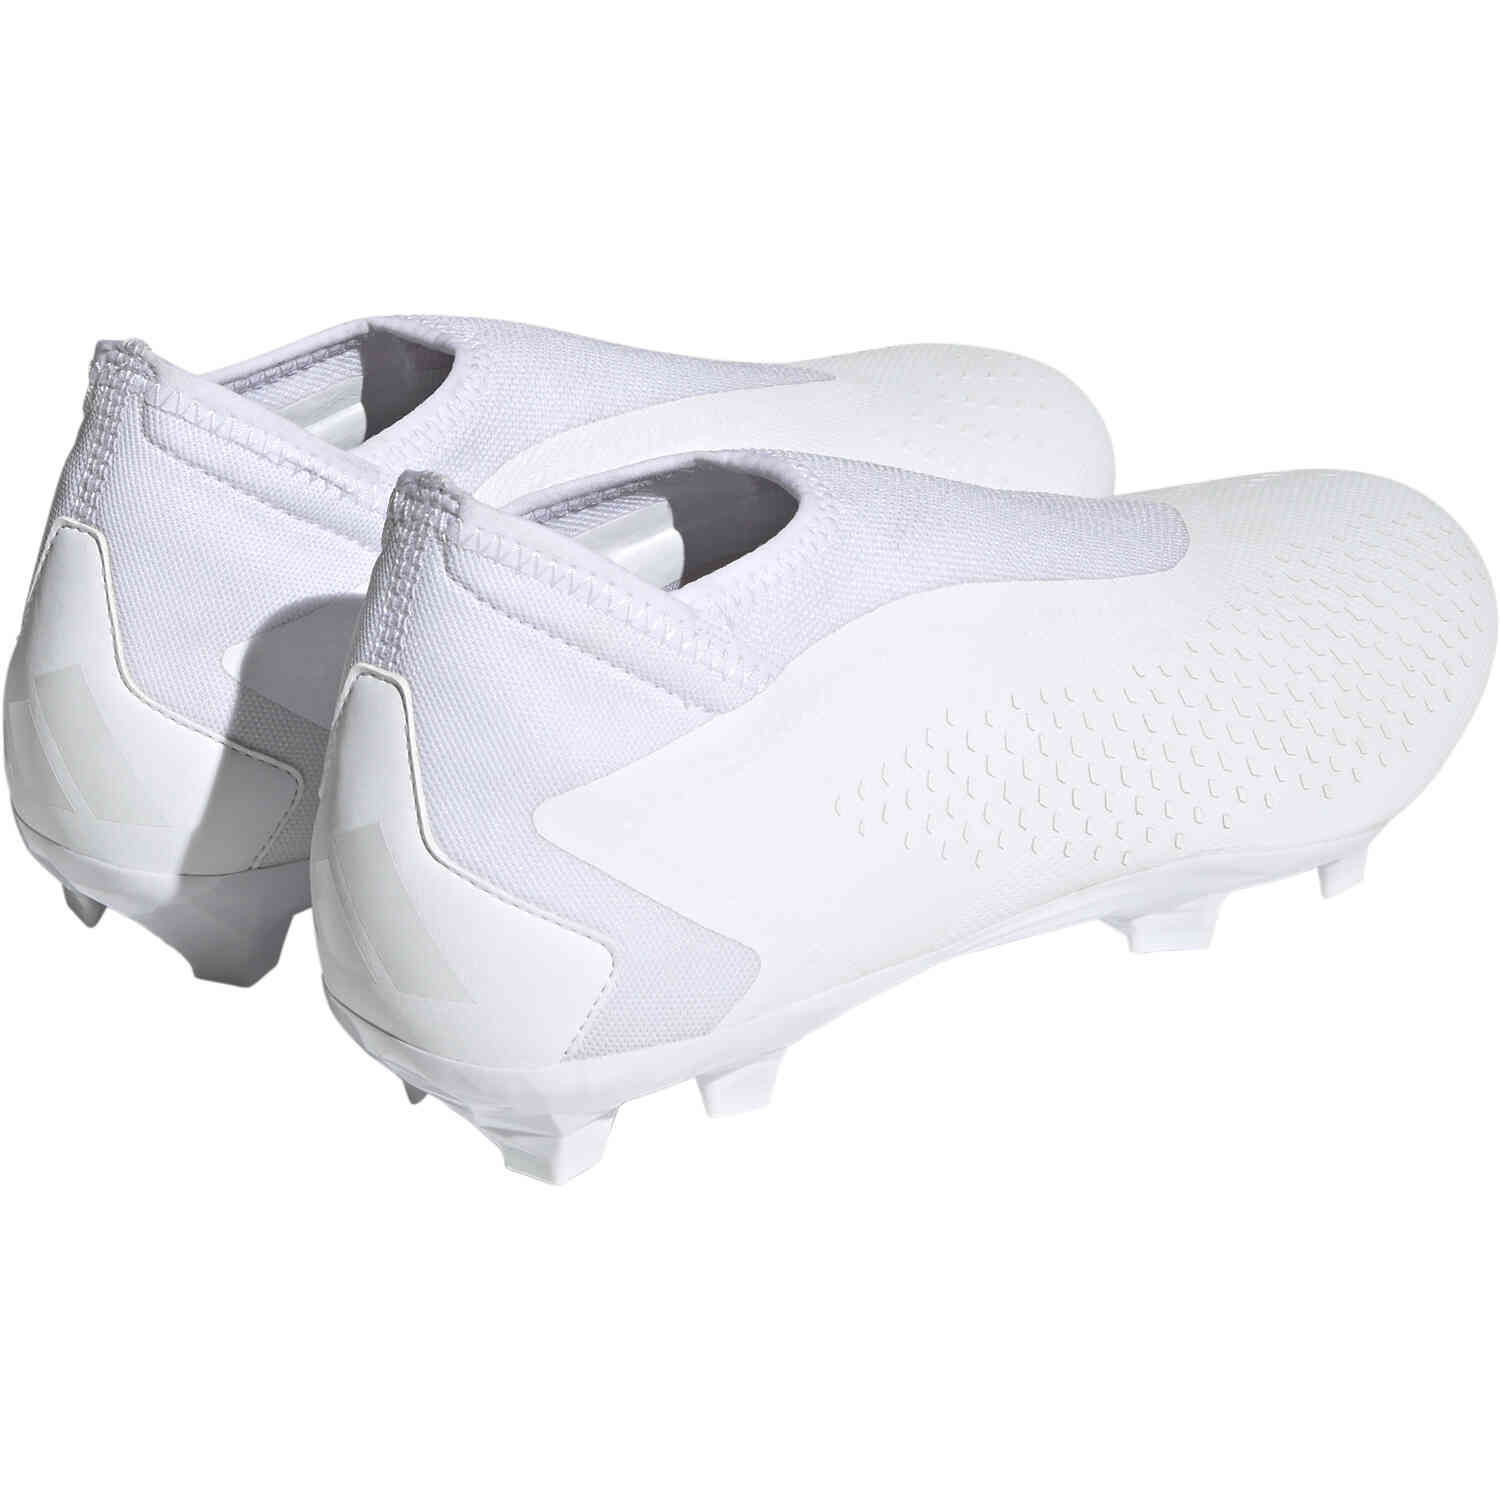 adidas Laceless Predator Accuracy.3 FG – Pearlized Pack